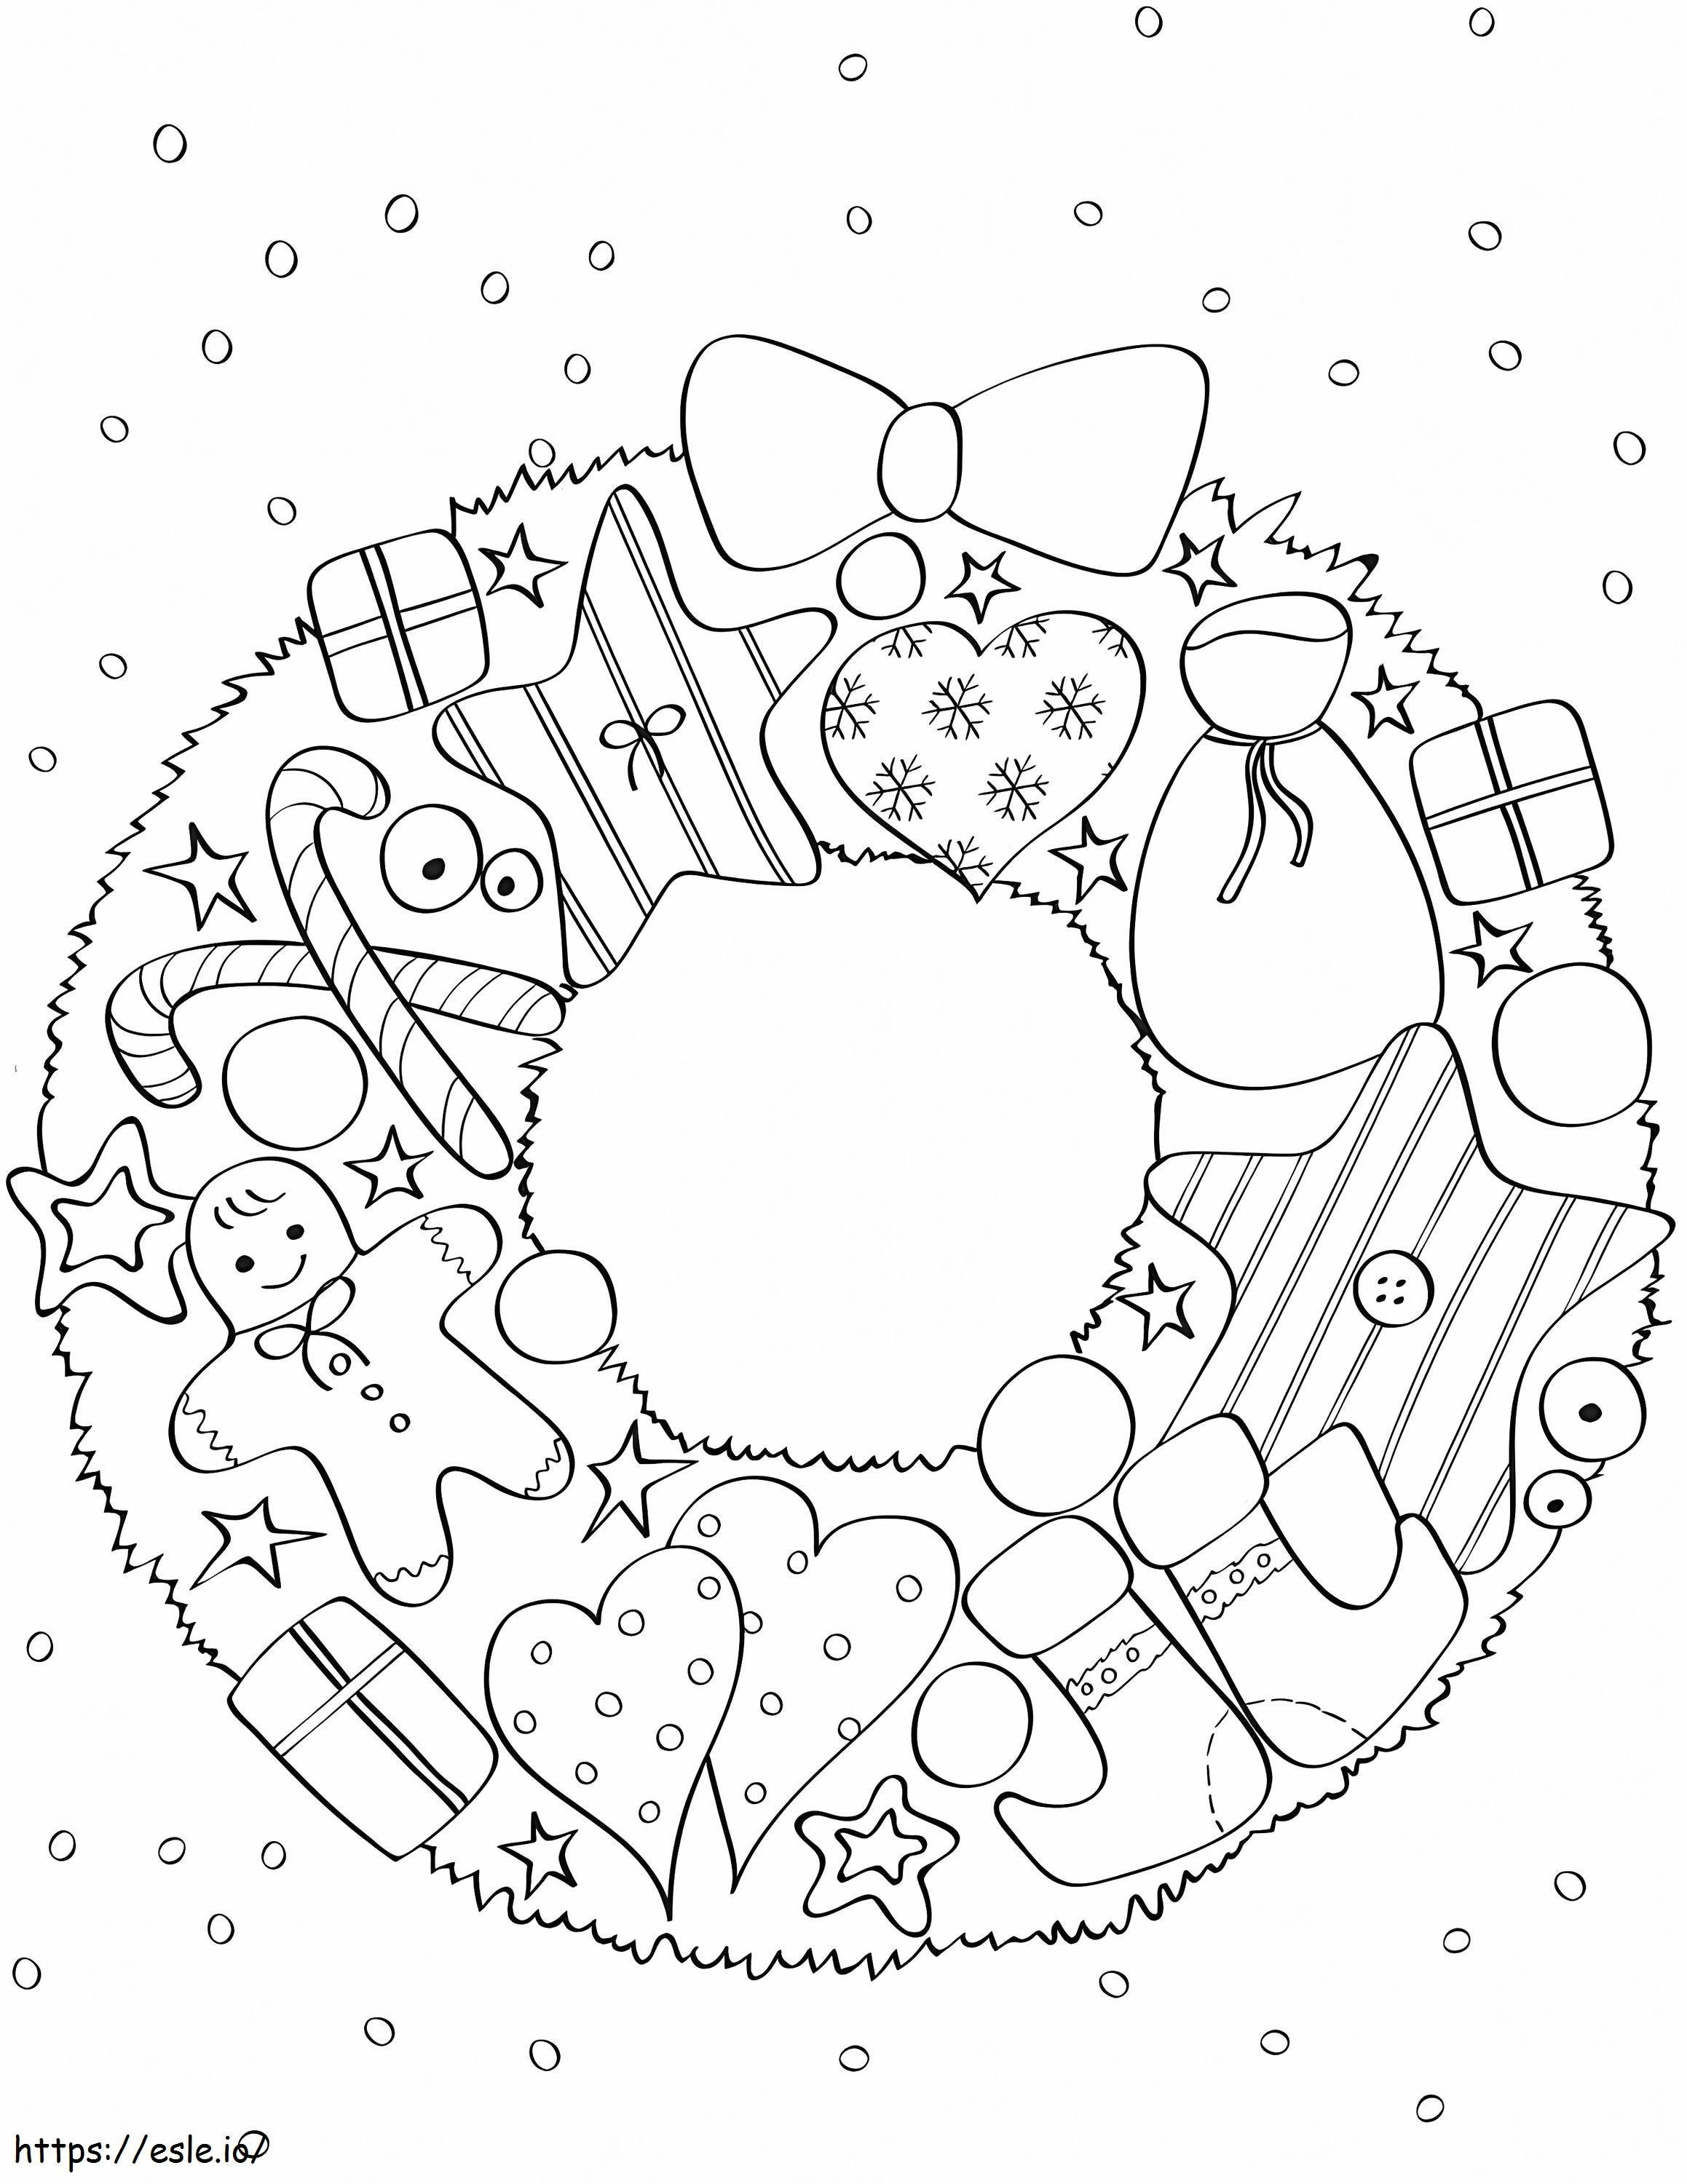 Christmas Wreath 1 coloring page